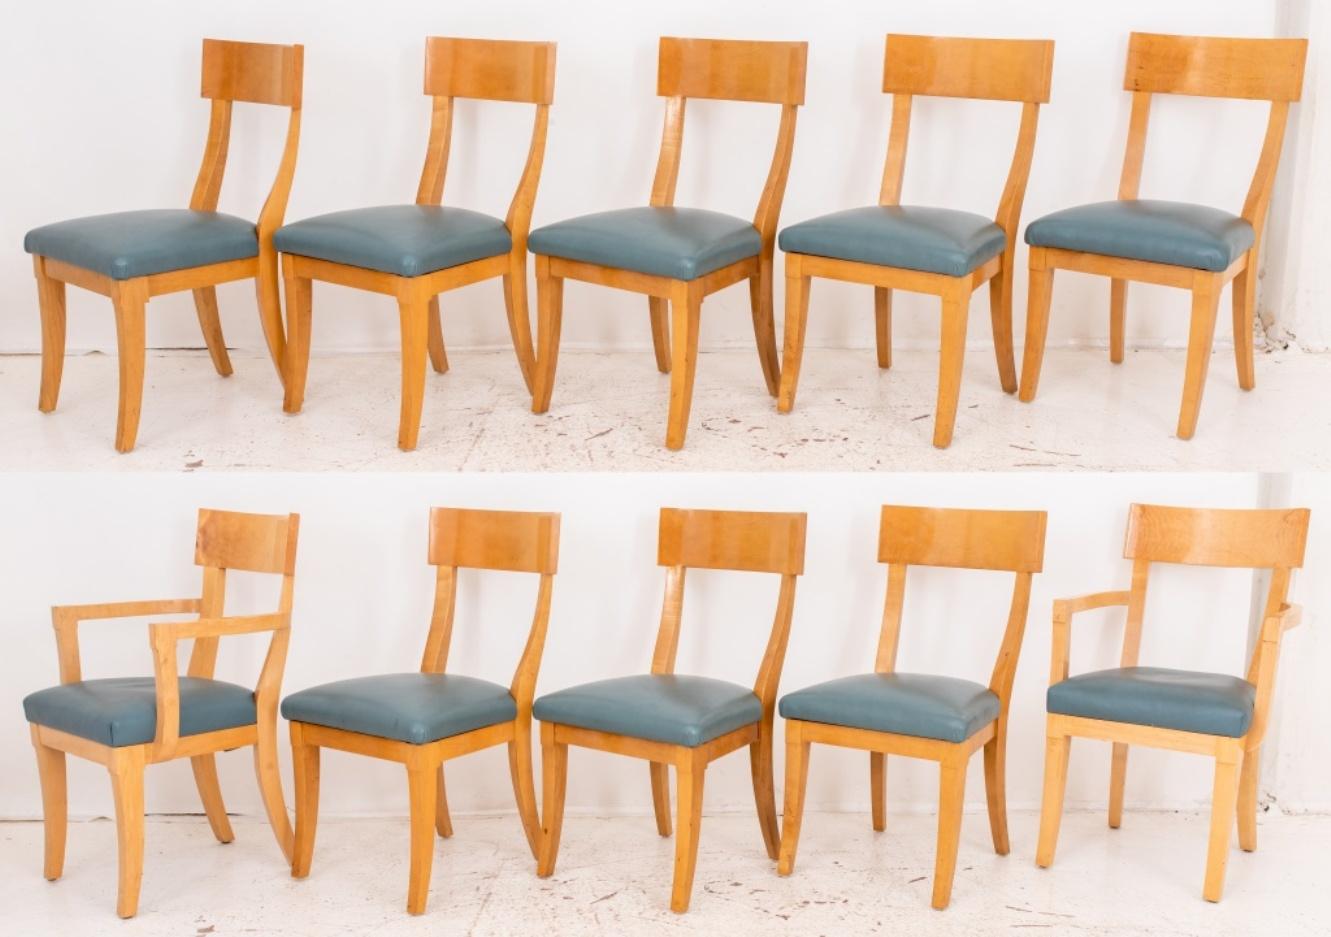 Scandinavian Neoclassical Revival dining chairs, set of ten (10), comprising two (2) arm chairs and eight (8) side chairs, in birch and of modified Klismos form with curving single back panel above shaped seats upholstered in Wedgwood blue leather,